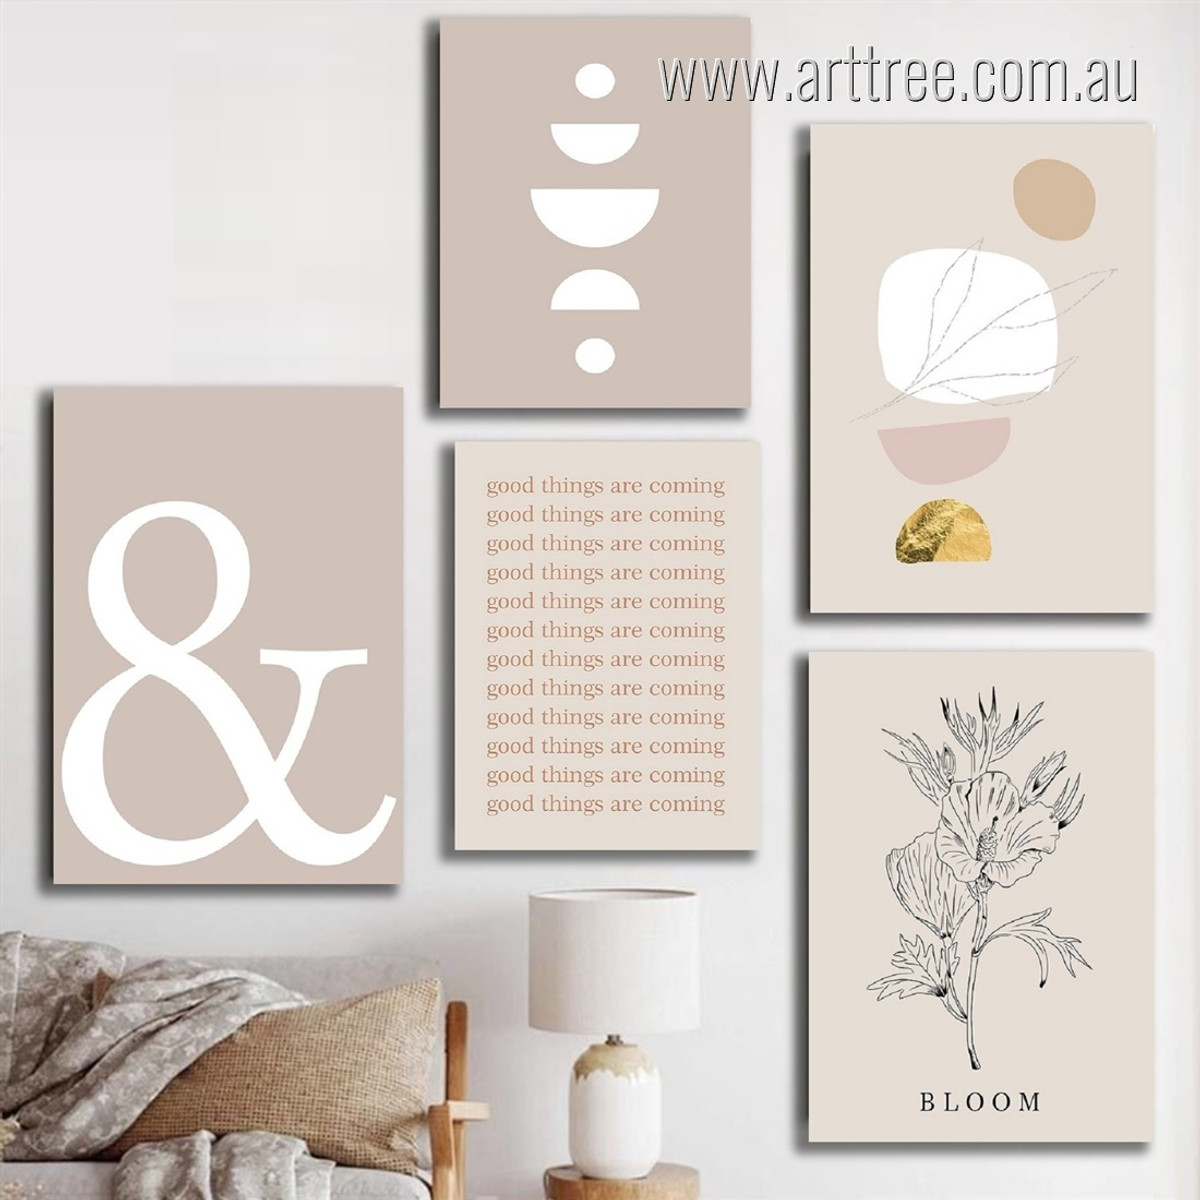 Good Things Are Coming Spots Boho Style Quotes 5 Multi Panel Set Photograph Geometrical Stretched Rolled Print on Canvas Artwork Online for Room Wall Trimming